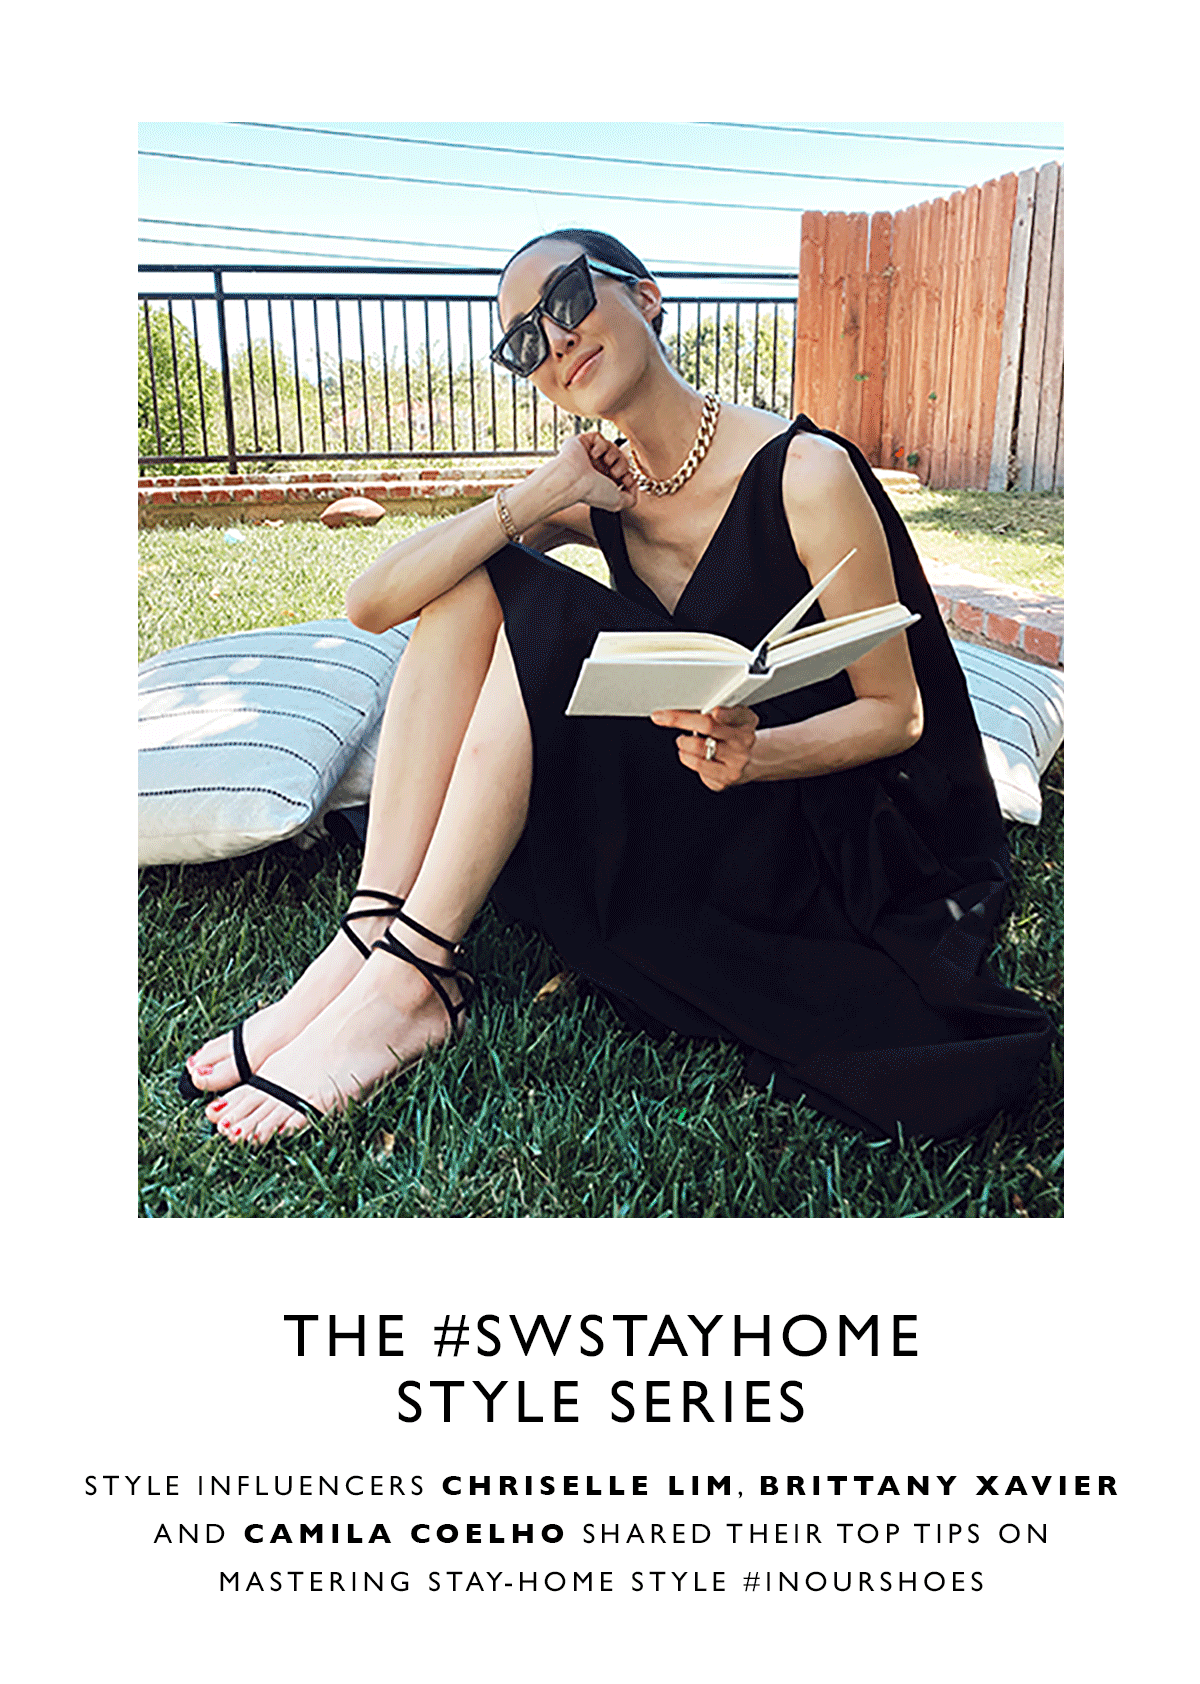  The #SWStayHome Style Series. Style influencers Chriselle Lim, Brittany Xavier and Camila Coelho shared their top tips on mastering stay-home style #inourshoes